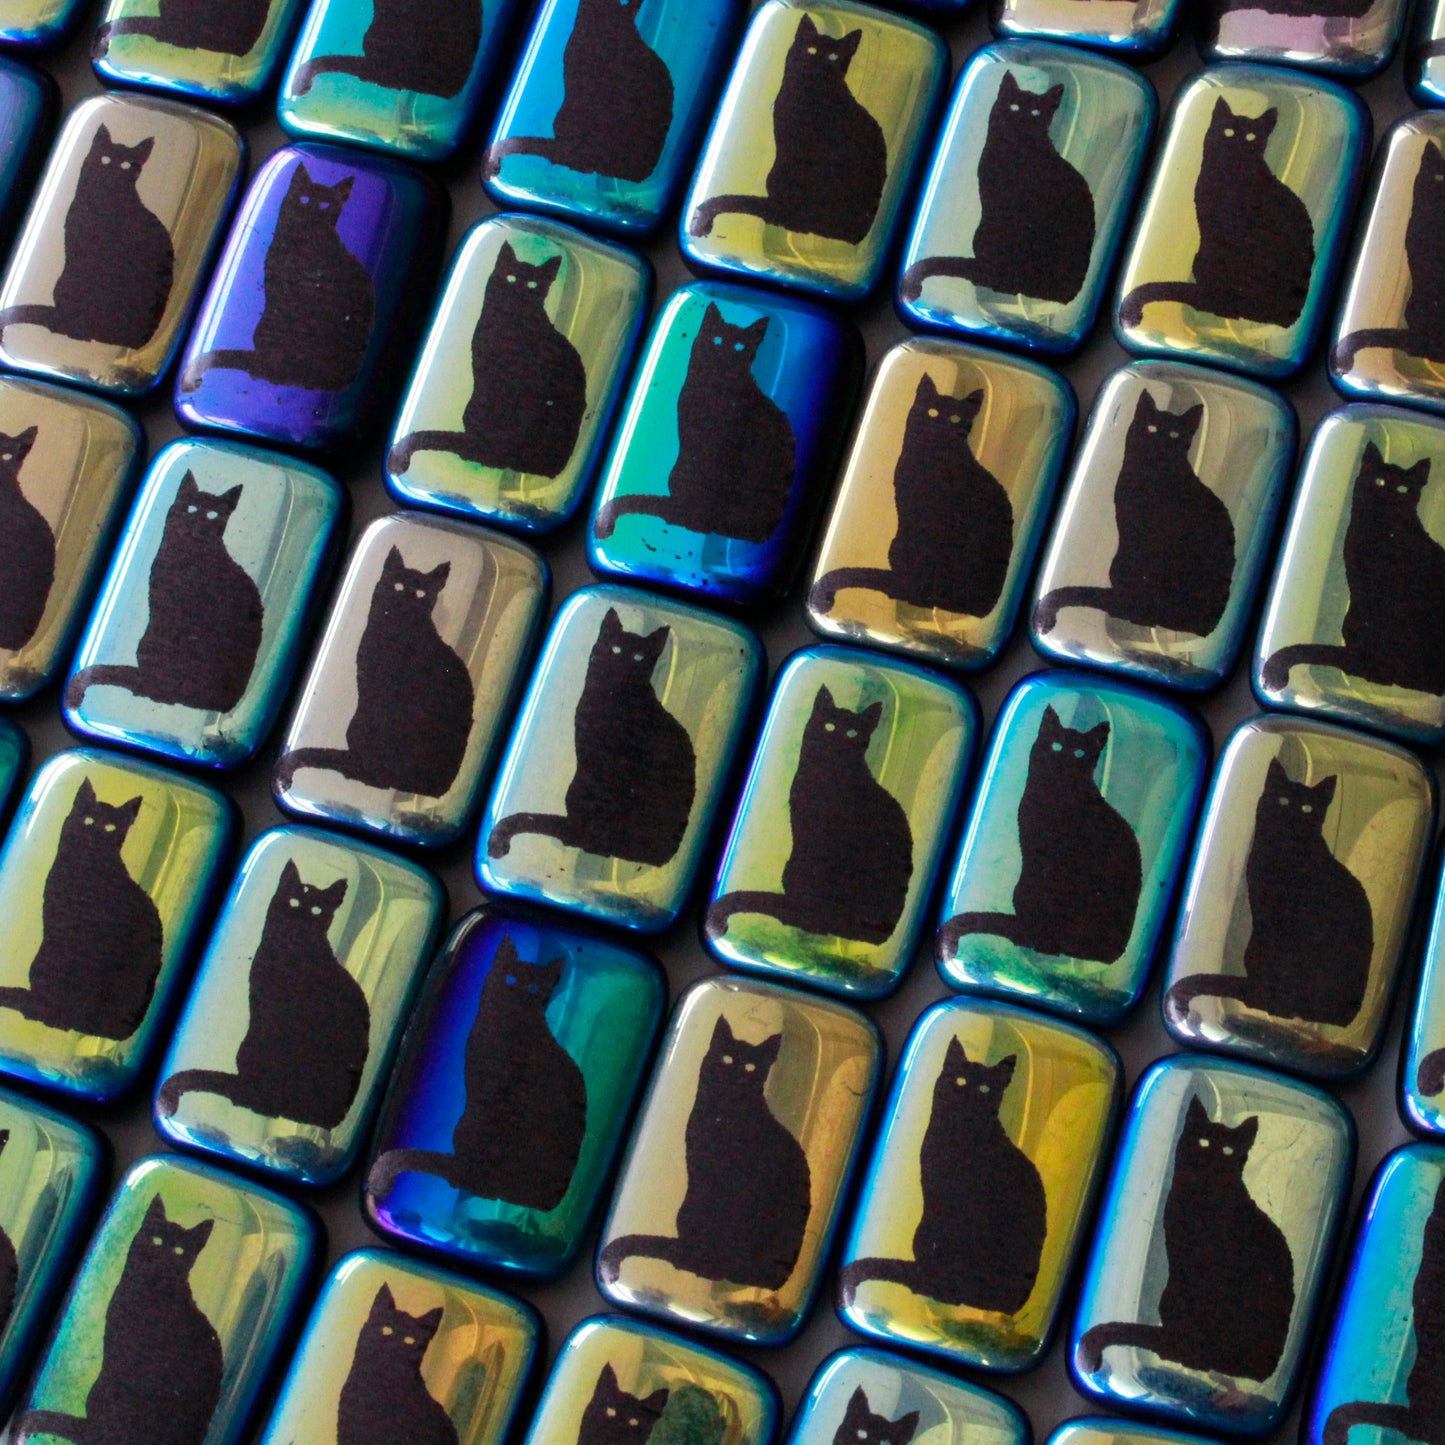 Load image into Gallery viewer, Black Cat Rectangle Beads - 6 Beads
